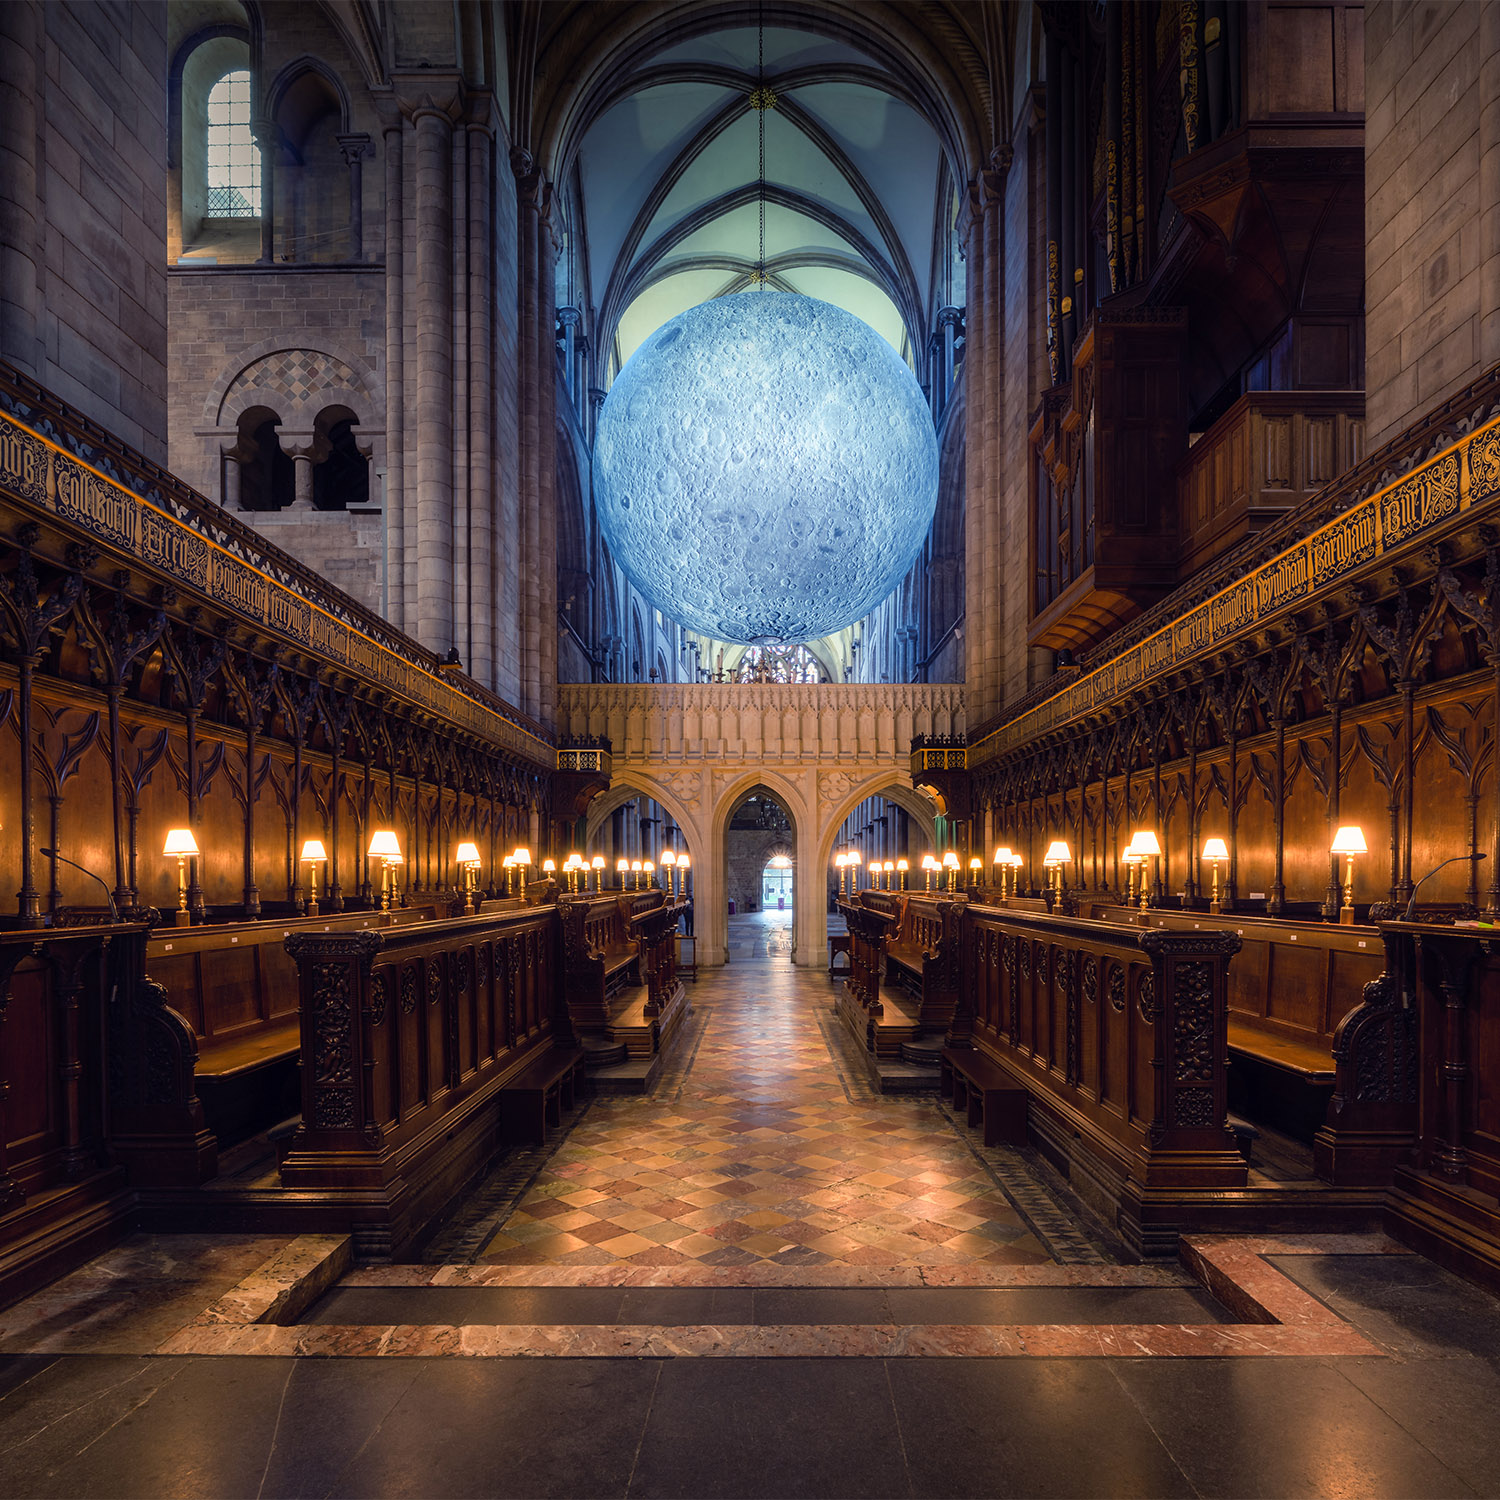 The Museum of the Moon stands in the Nave of Chichester Cathedral